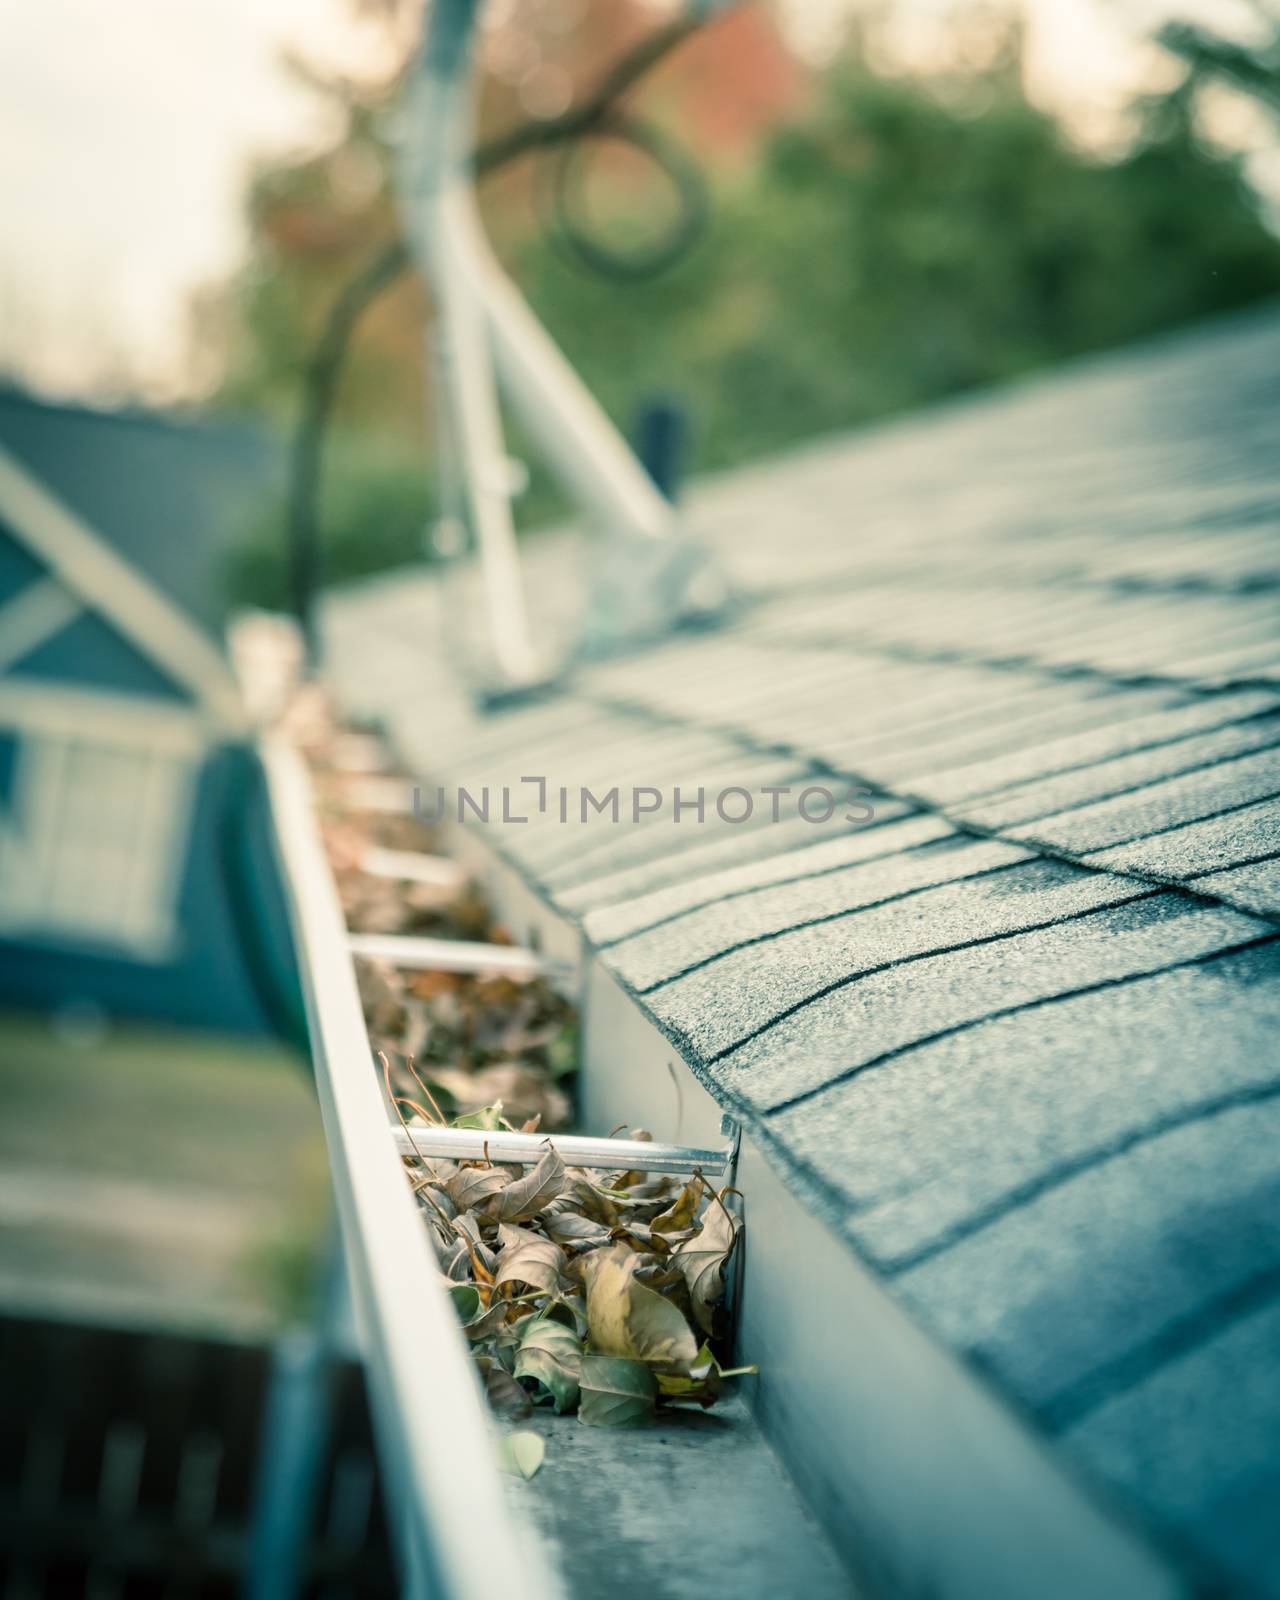 Gutter full of dried leaves near roof shingles with satellite dish in background by trongnguyen